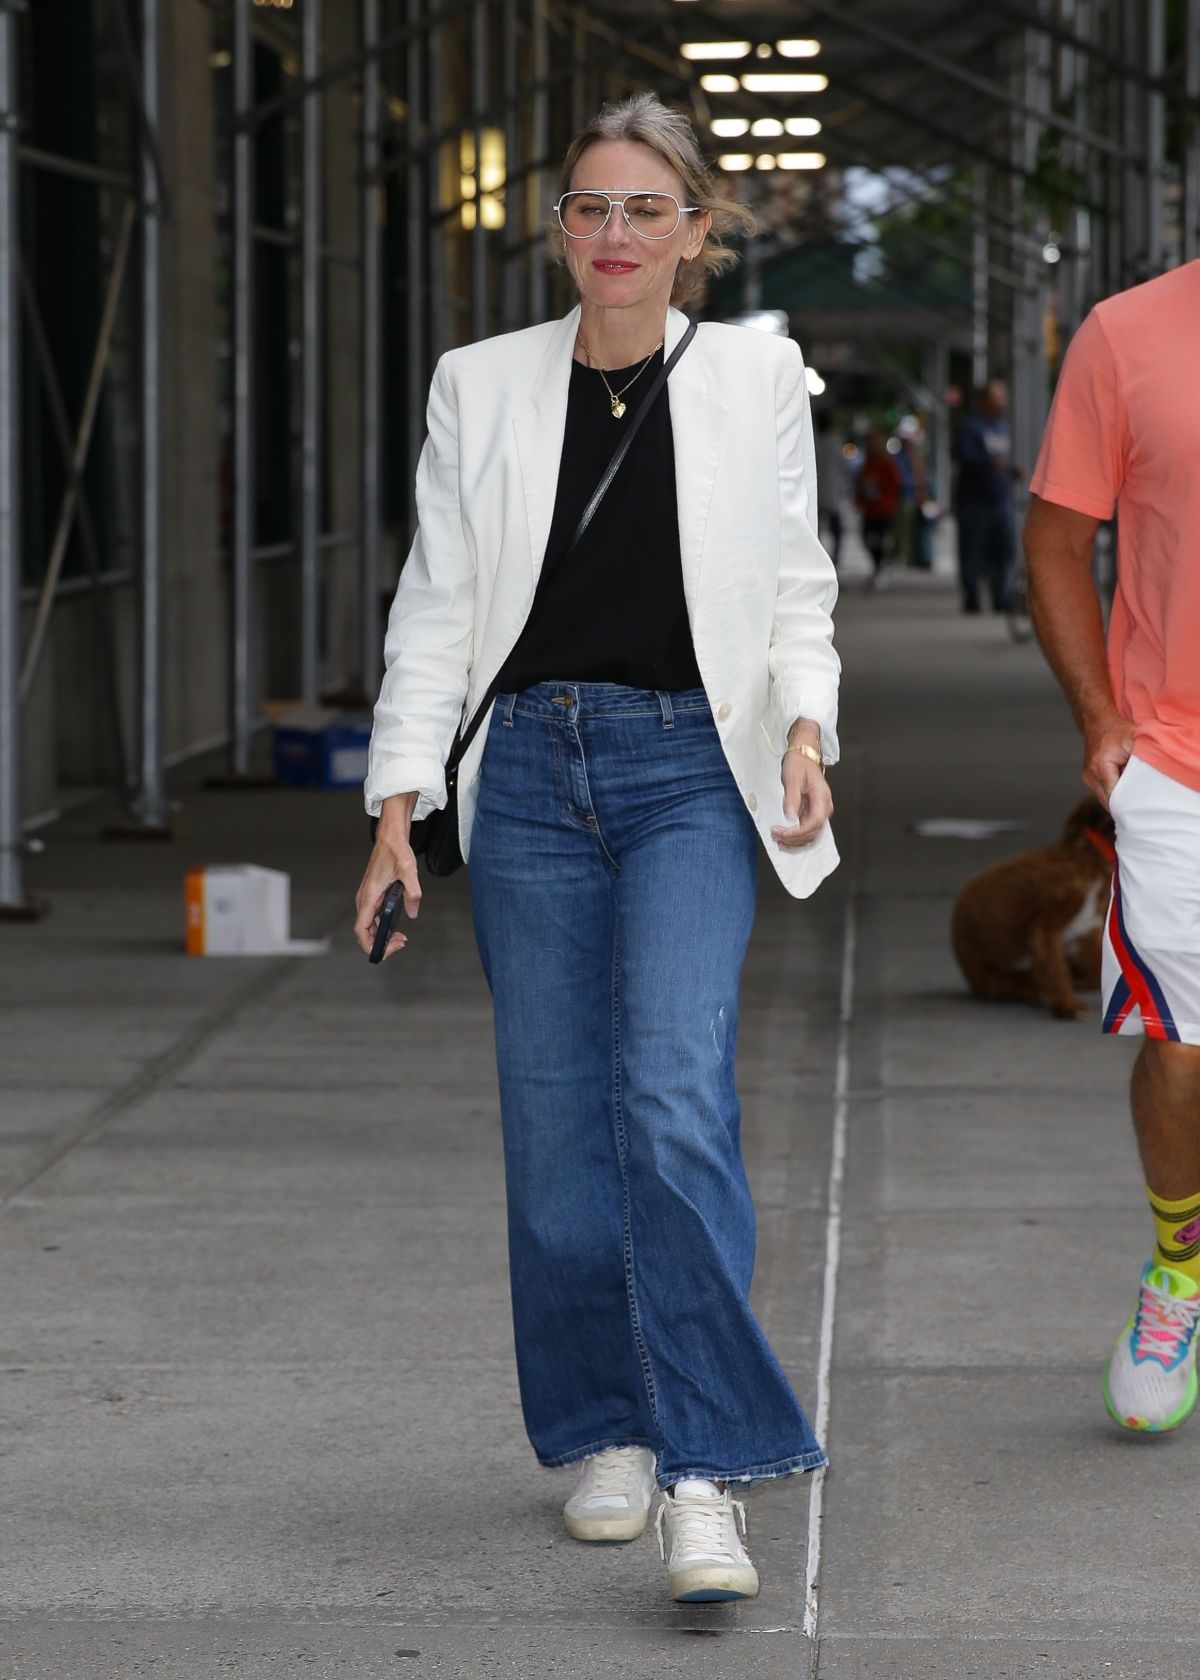 NAOMI WATTS Out and About in New York 06/07/2022 – HawtCelebs